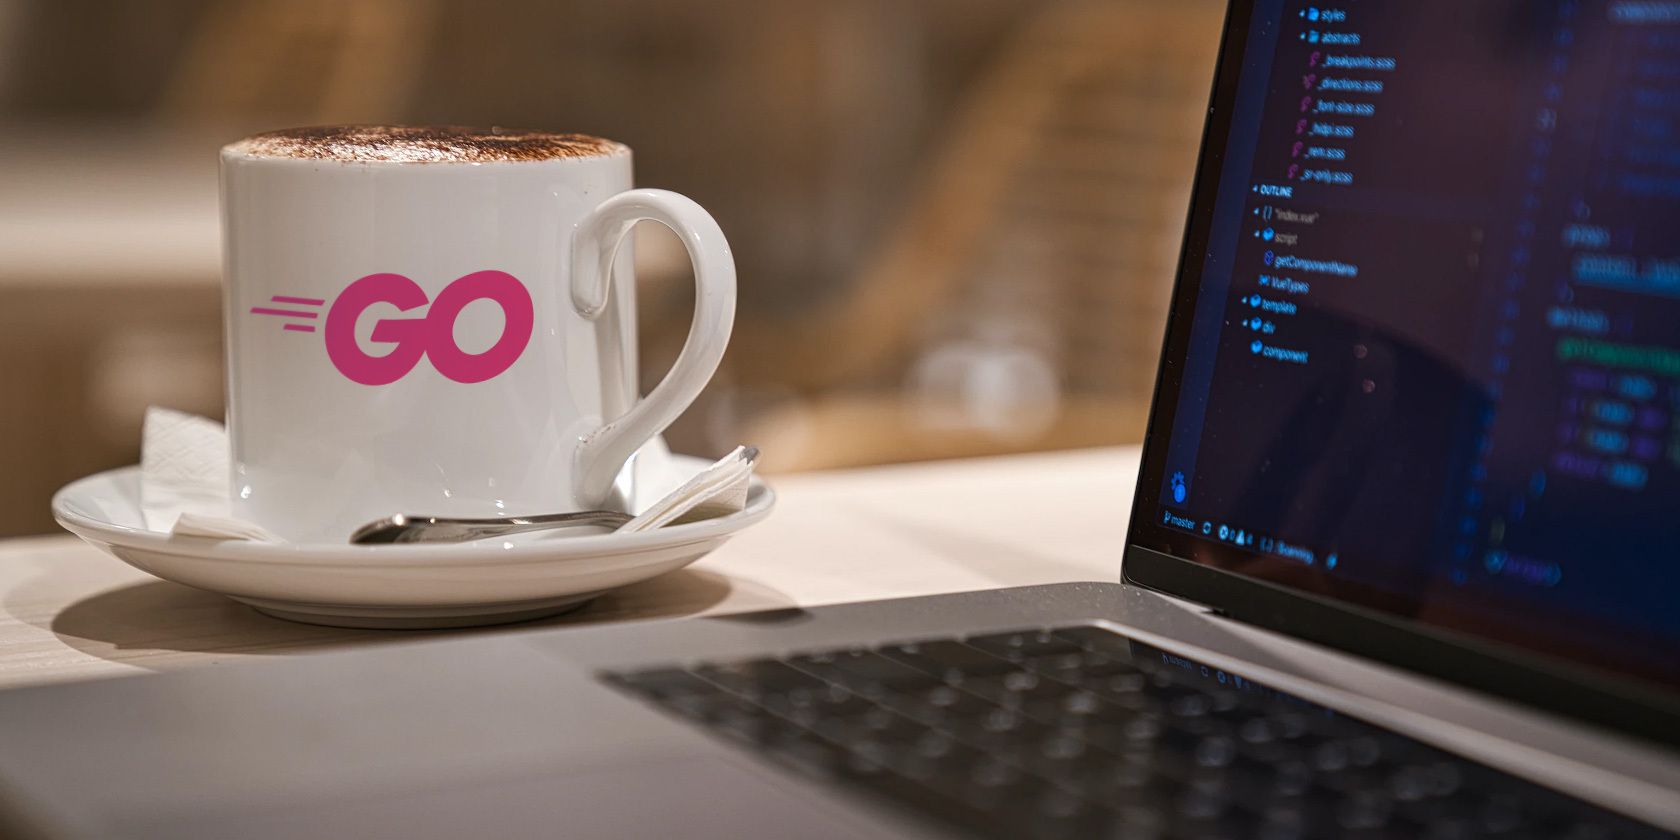 A partial view of a laptop in the foreground in front of a coffee cup with the Go logo on it.